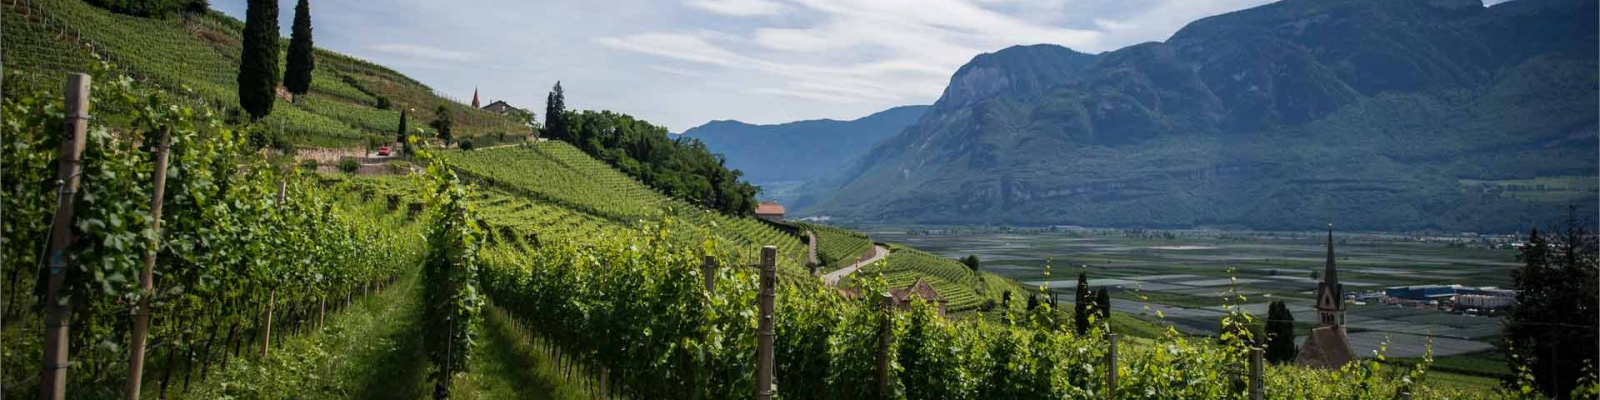 Vineyard on the side of a valley